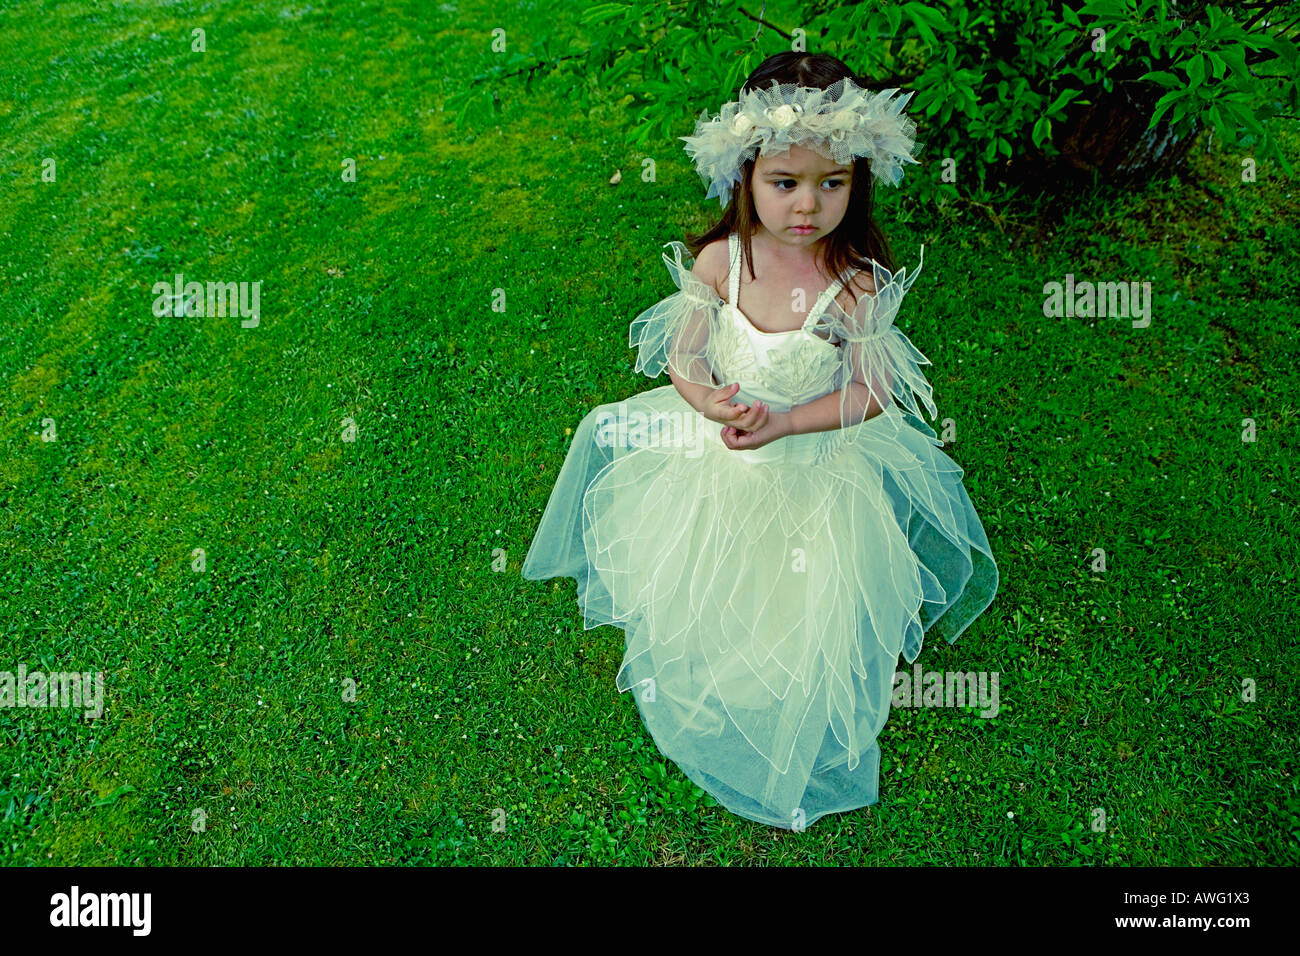 Little girl aged 3 in a bridesmaid dress beneath a tree on a green grass lawn Stock Photo